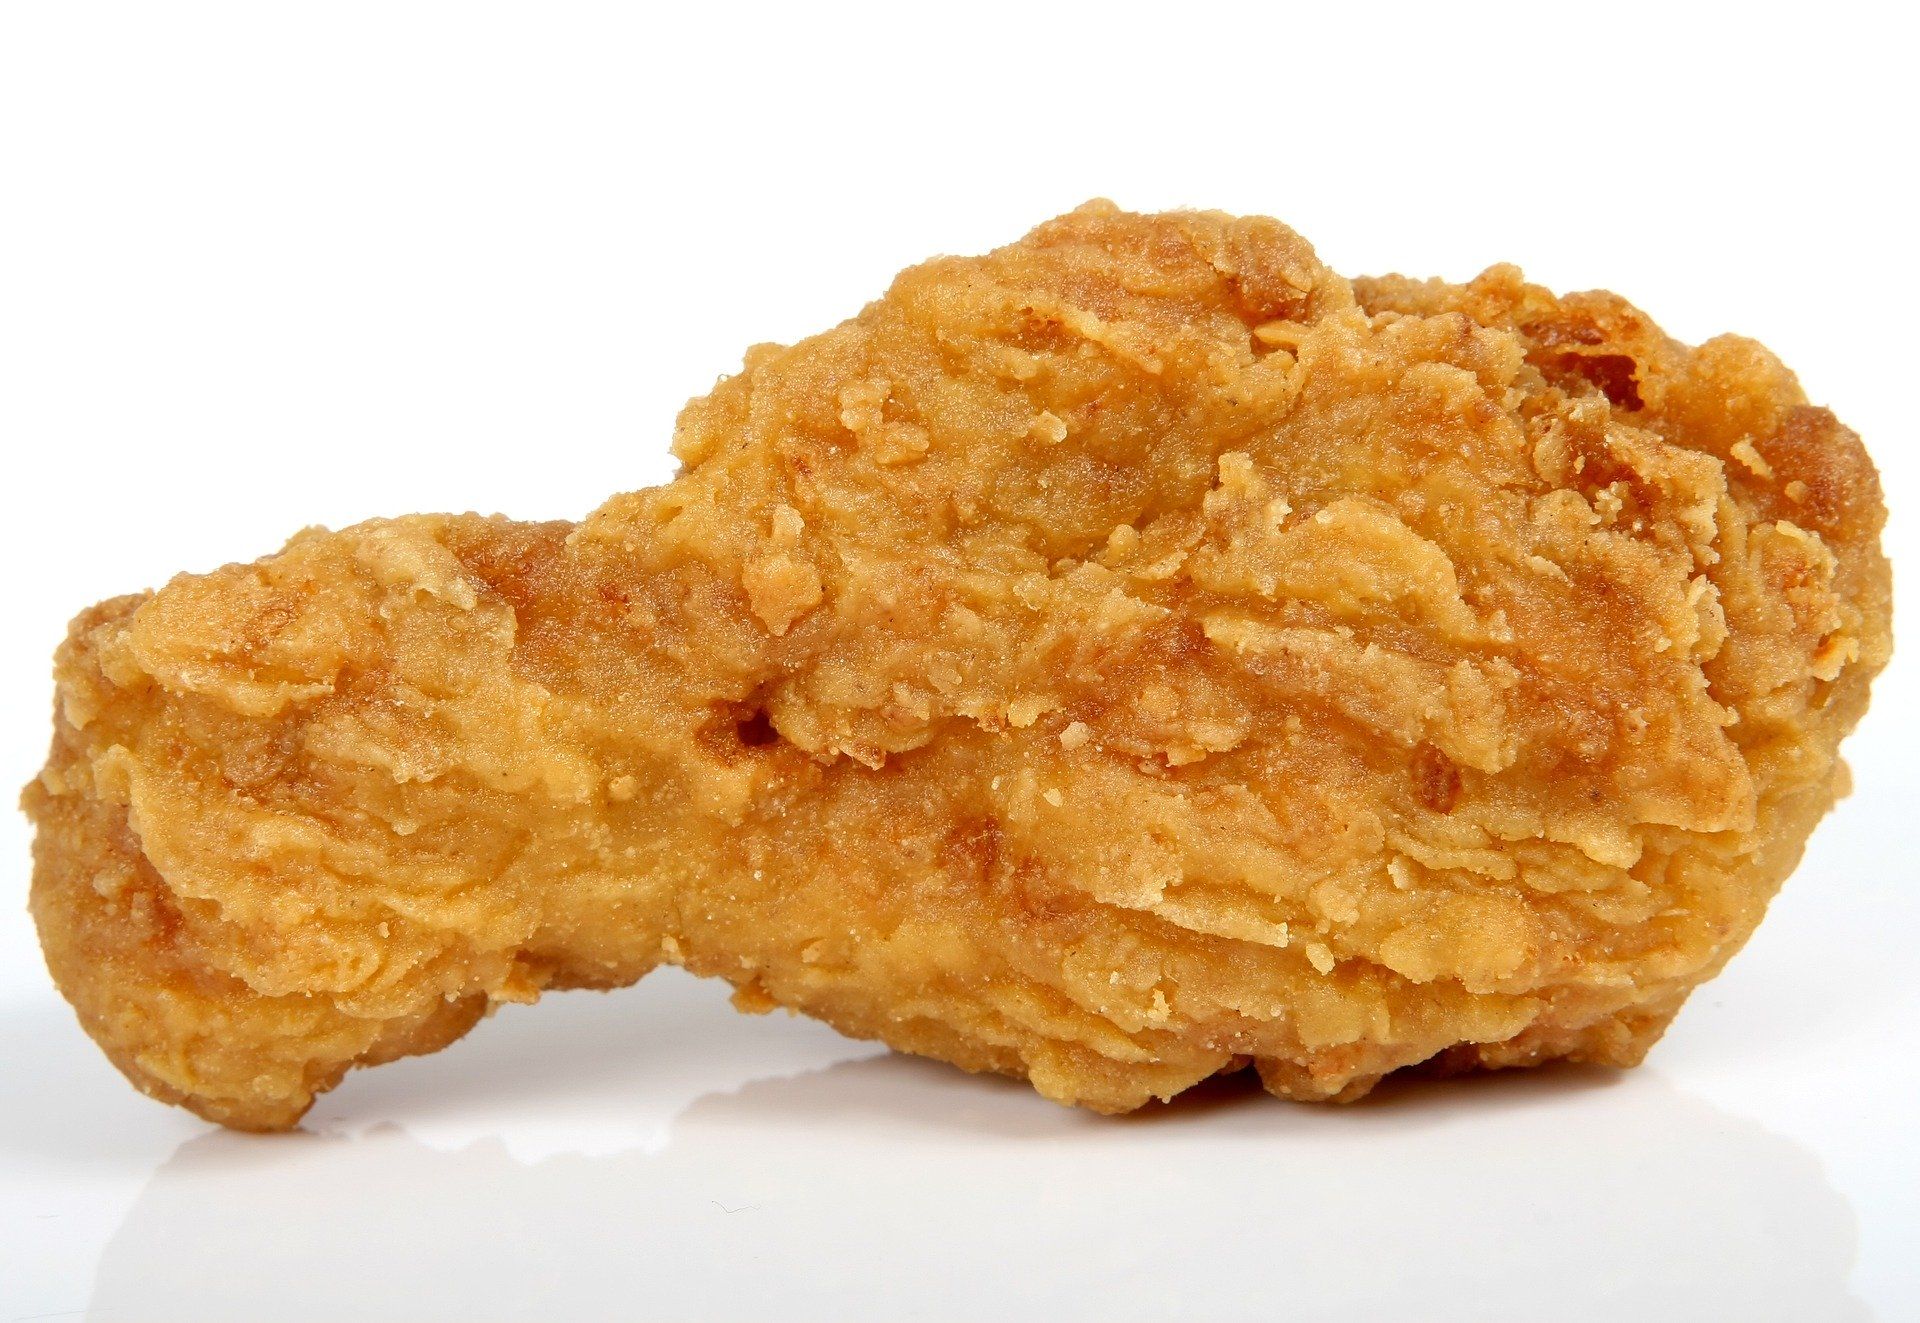 Fried chicken wing bad for brain health